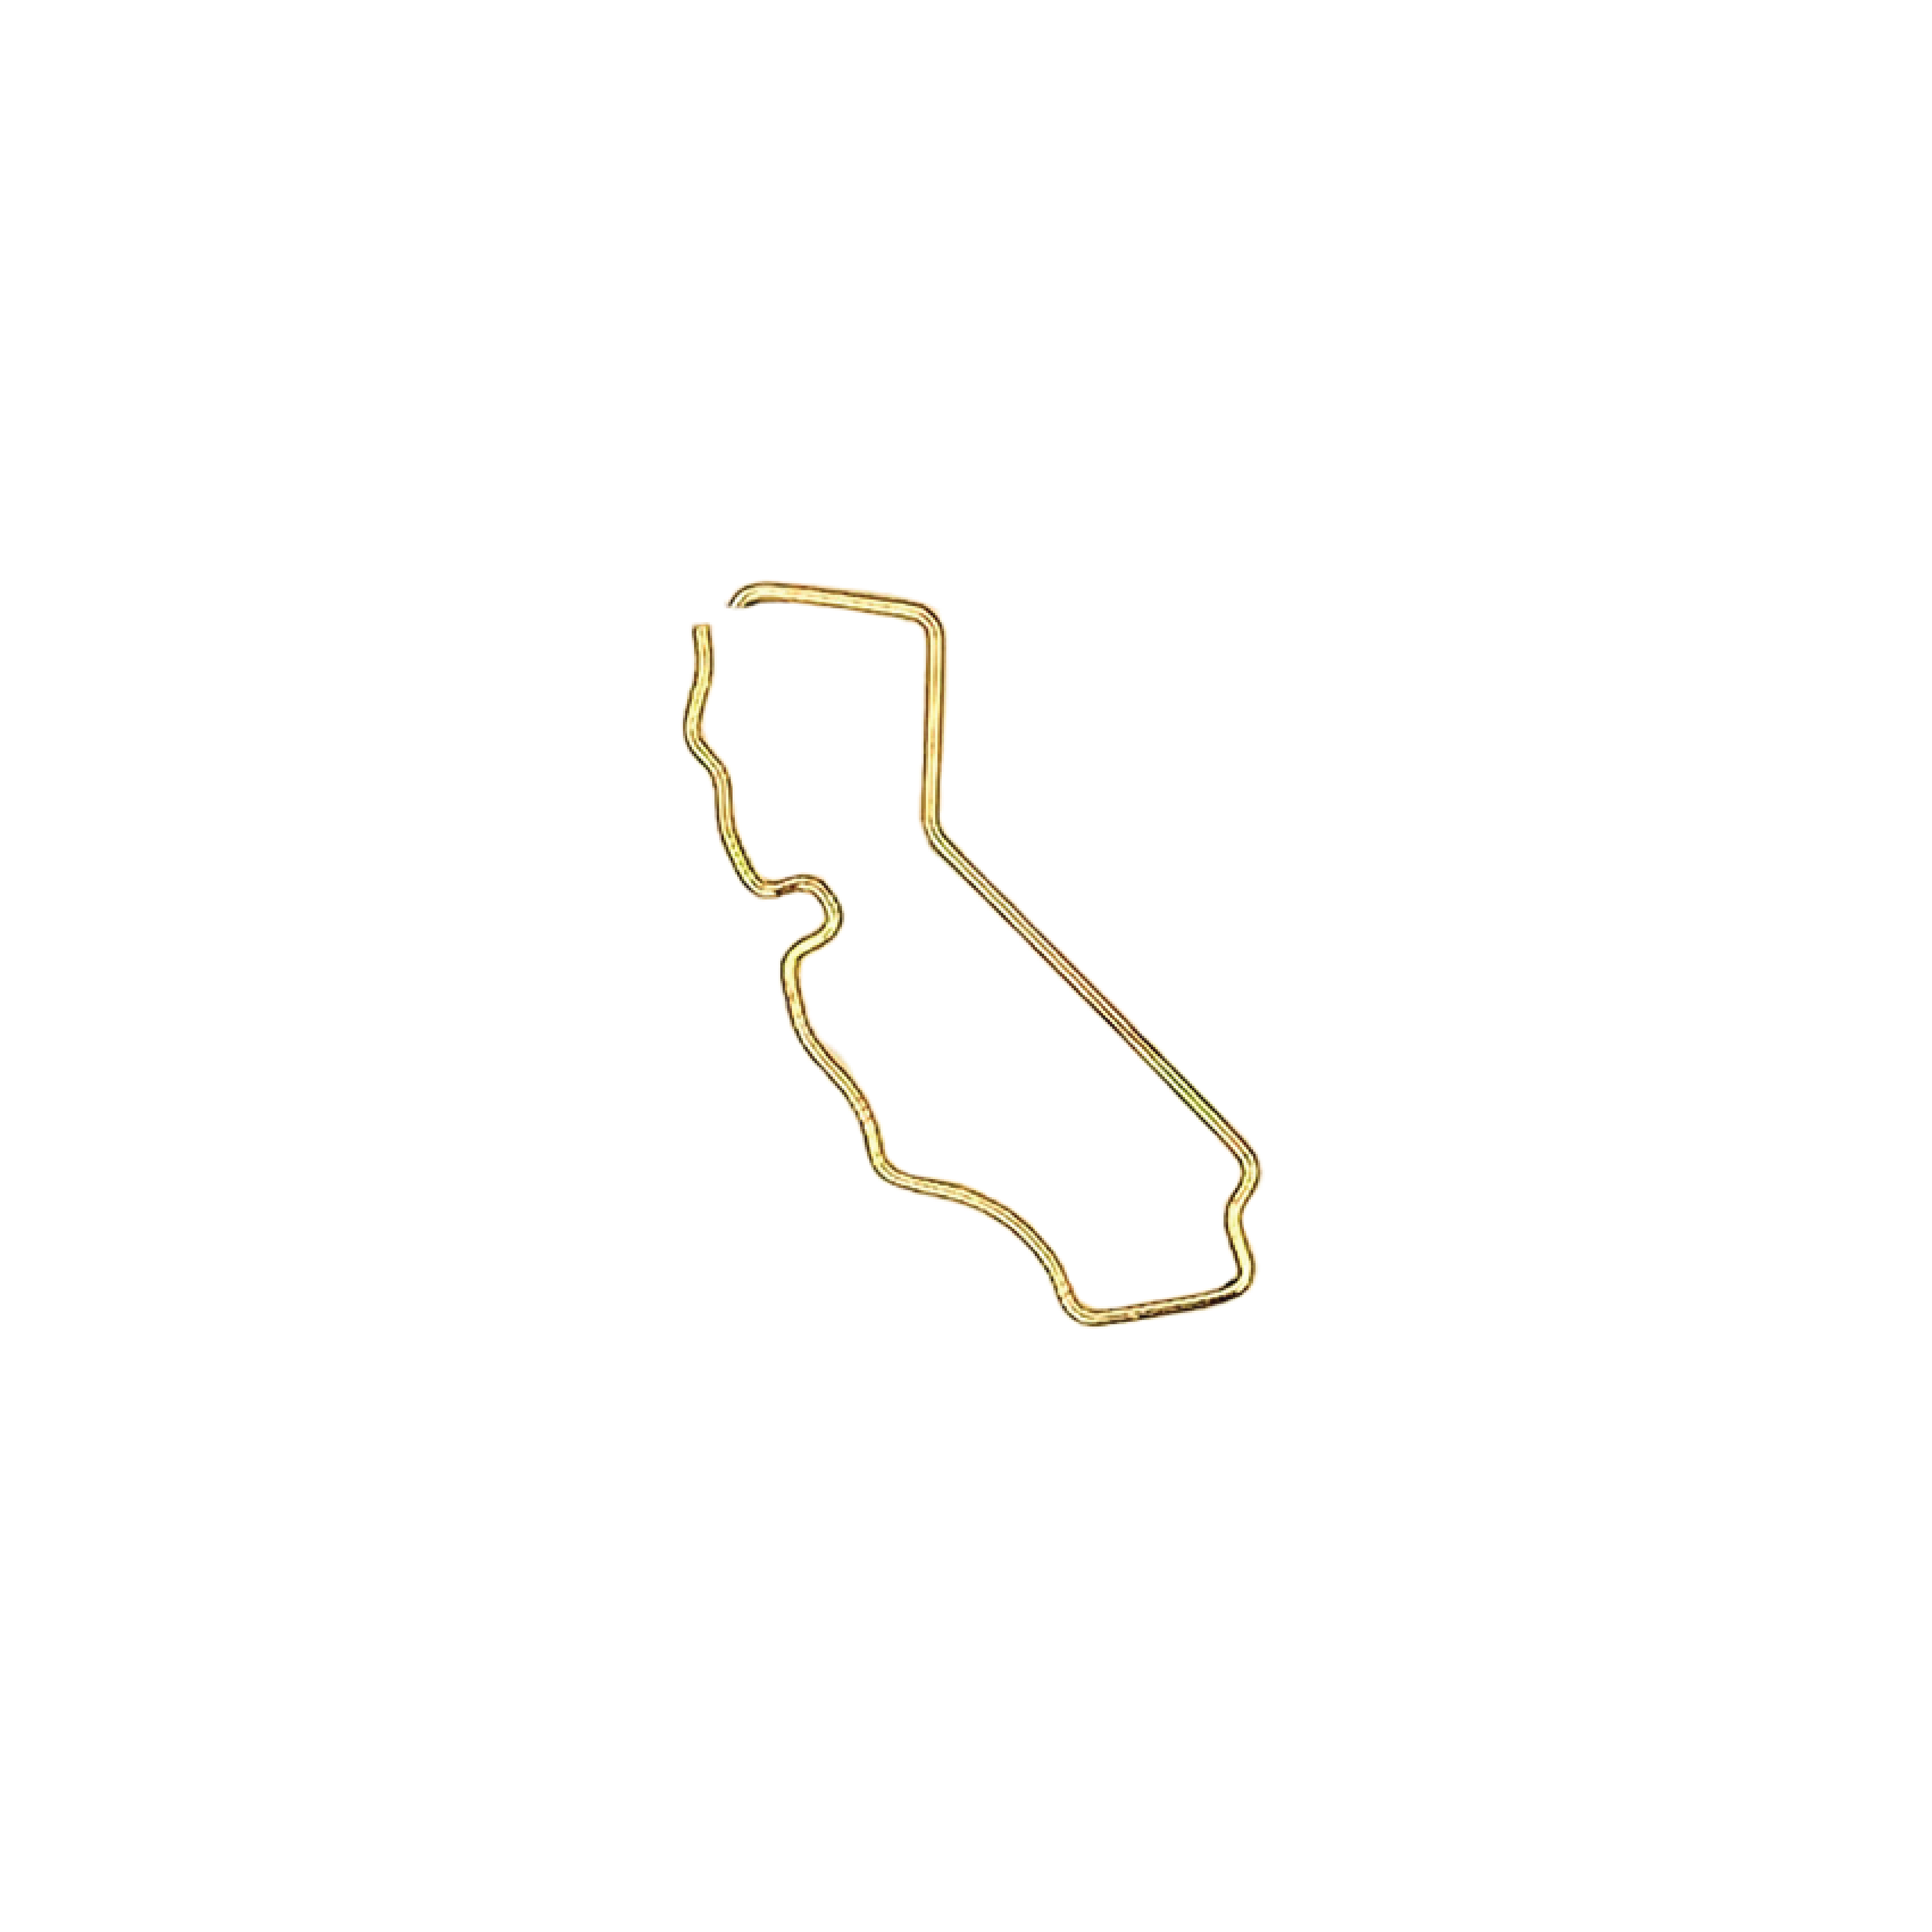 California State - 25 Gold Paperclips